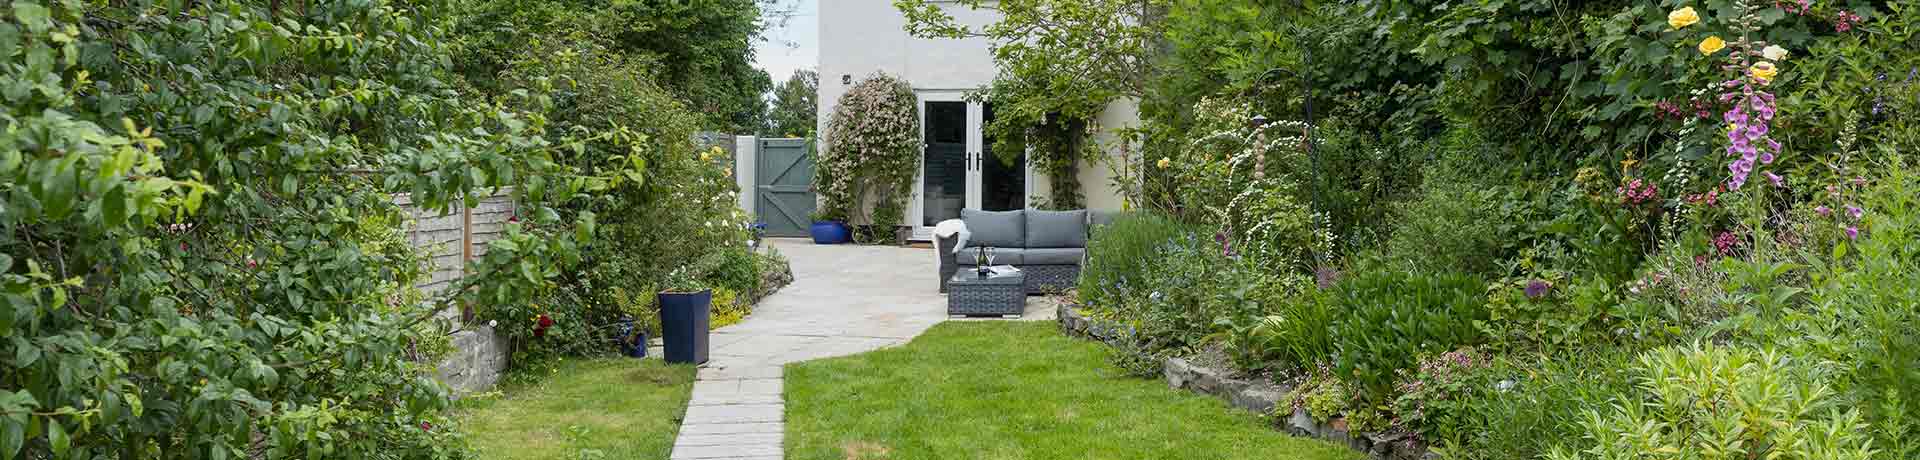 Dog friendly cottages in Lincolnshire with an enclosed garden.